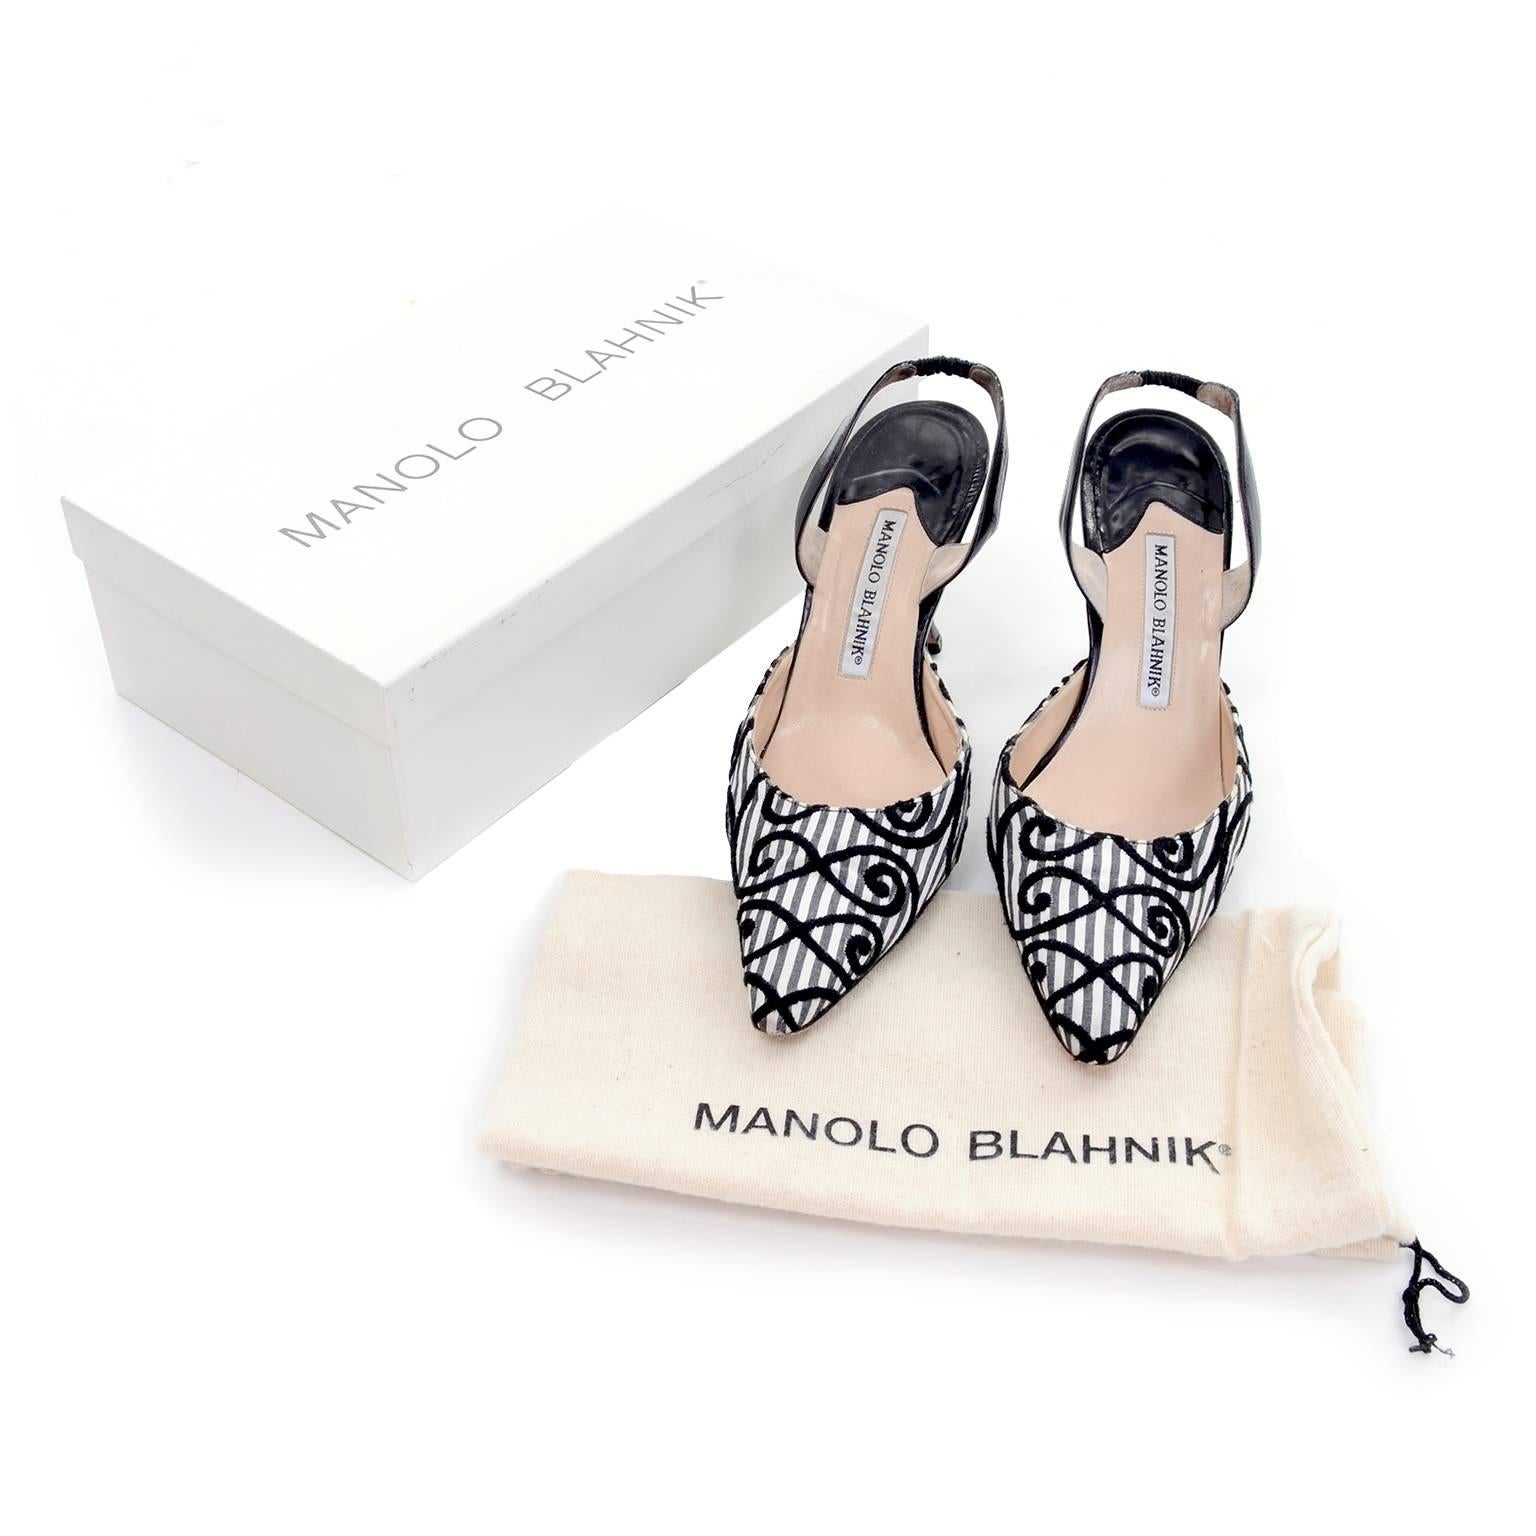 These vintage Manolo Blahnik Carolyne shoes have black velvet patterned swirls on Charcoal and white striped fabric and black leather trim. These slingback shoes are labeled a size 37.5 and have 3 and 7/8